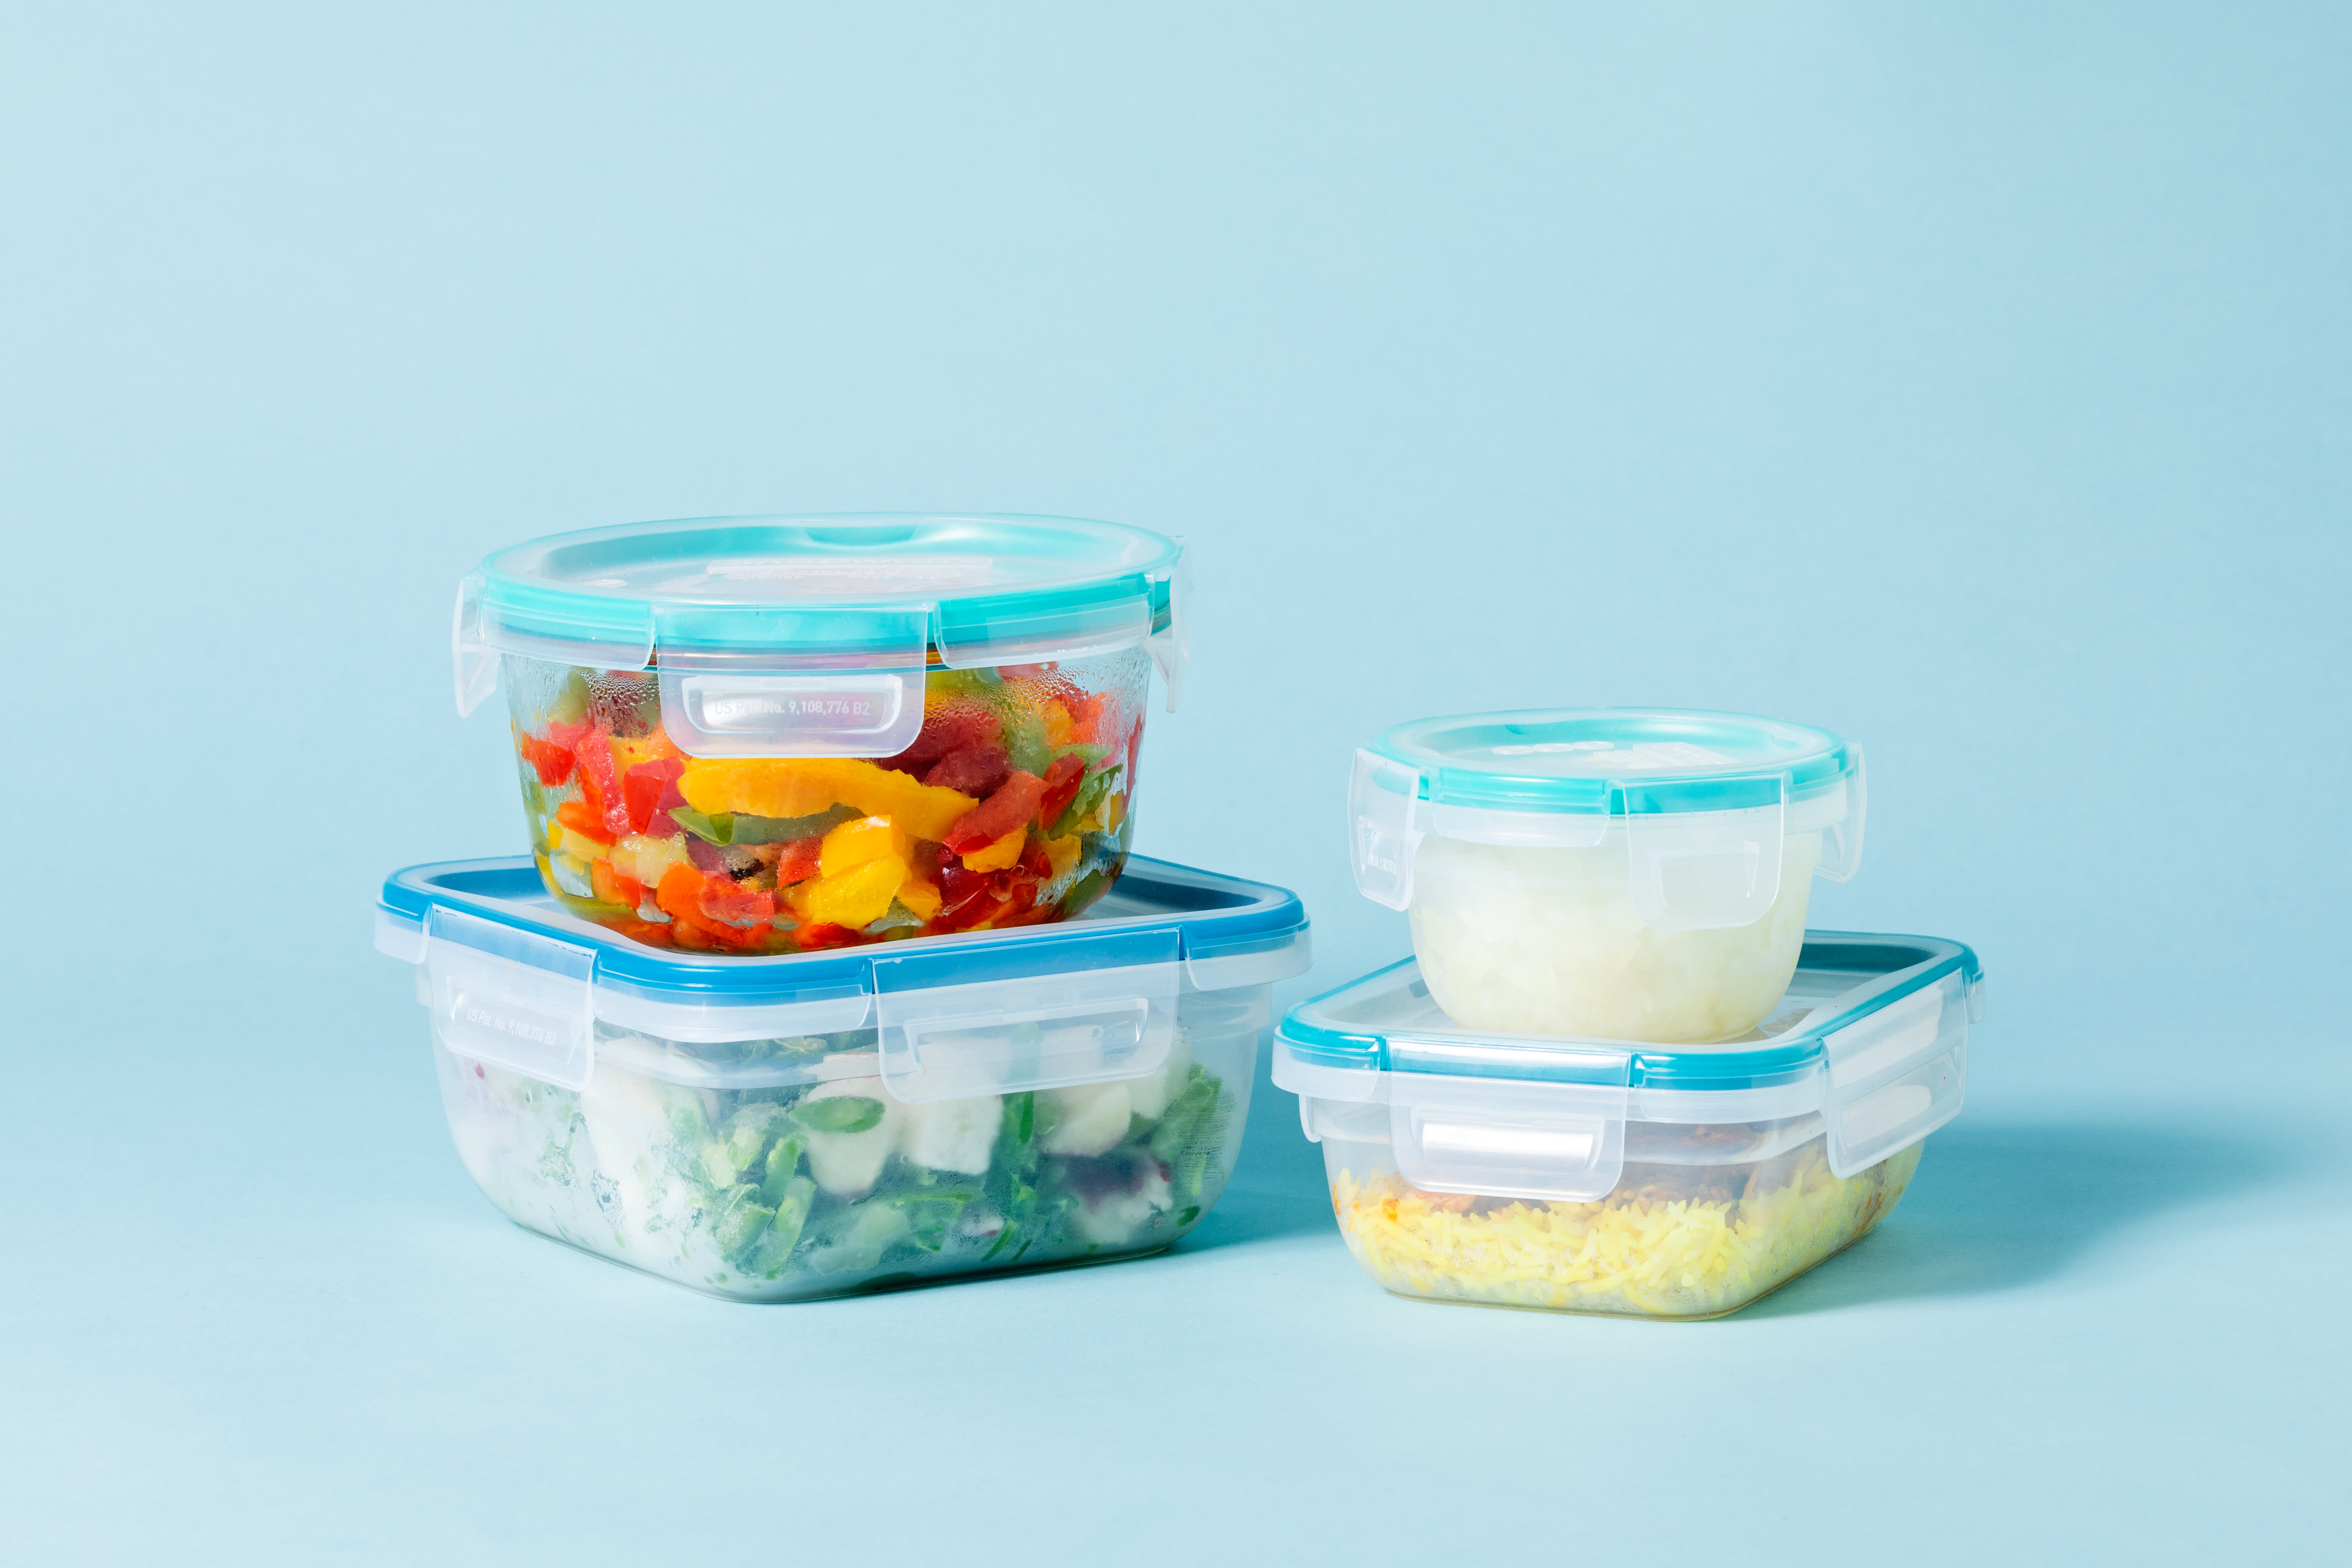 https://cdn.apartmenttherapy.info/image/upload/v1596826425/k/Photo/Lifestyle/2020-08-The%20Best%20Containers%20for%20Freezing%20Food/The-Best-Containers-for-Freezing-Food-6.jpg